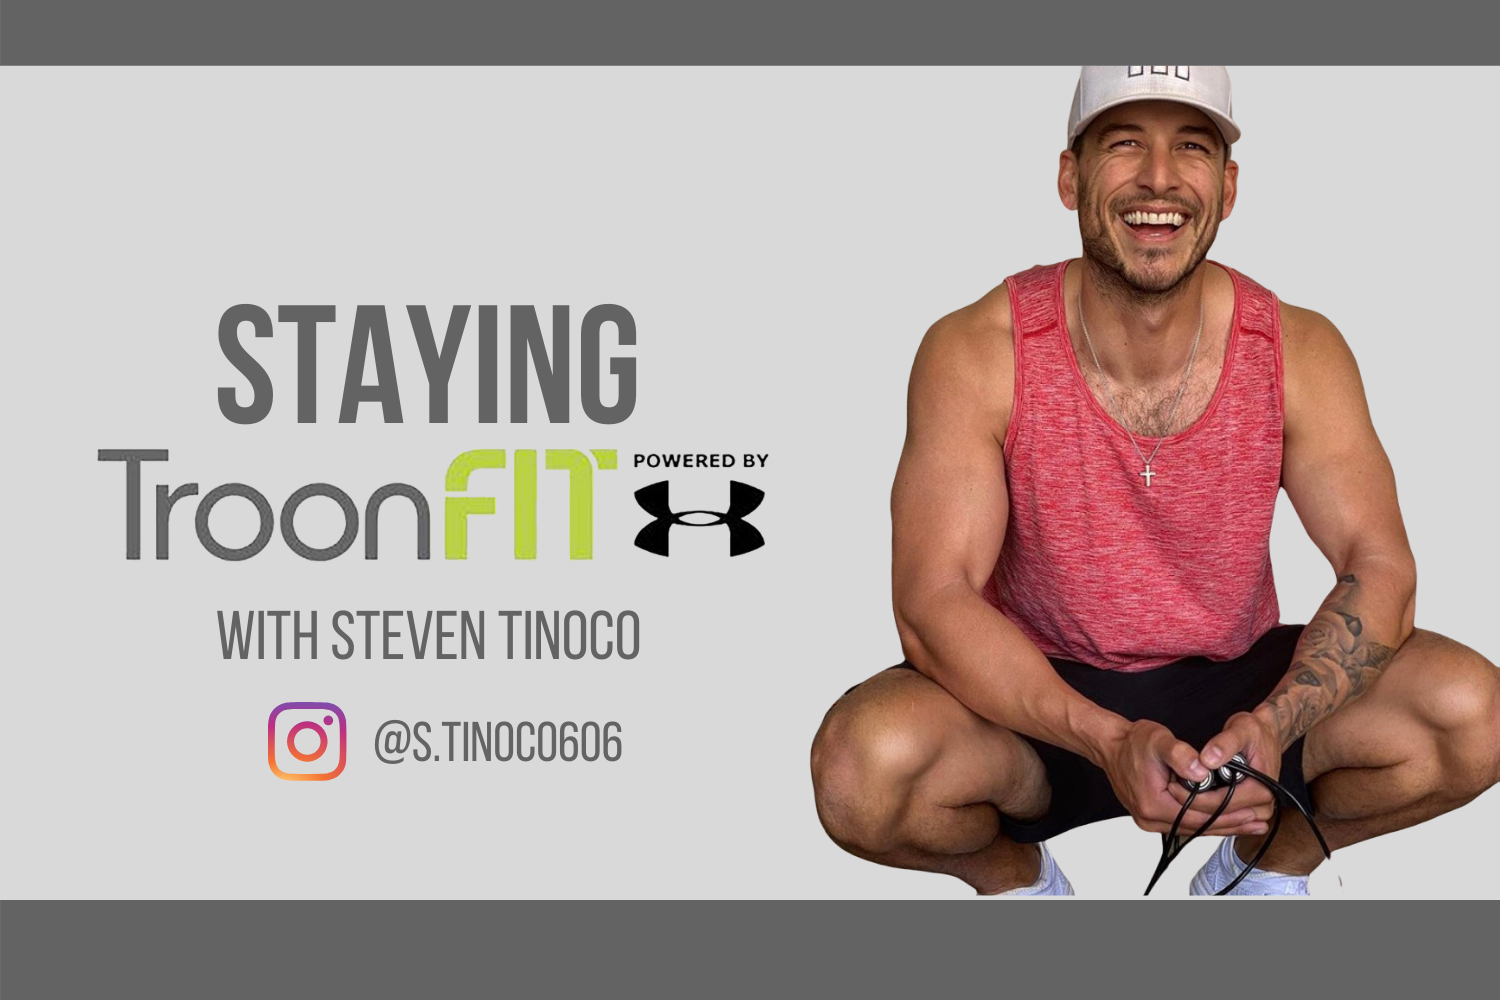 Staying TroonFIT, powered by Under Armor, with Steven Tinoco. @S.Tinoco606 on Instagram